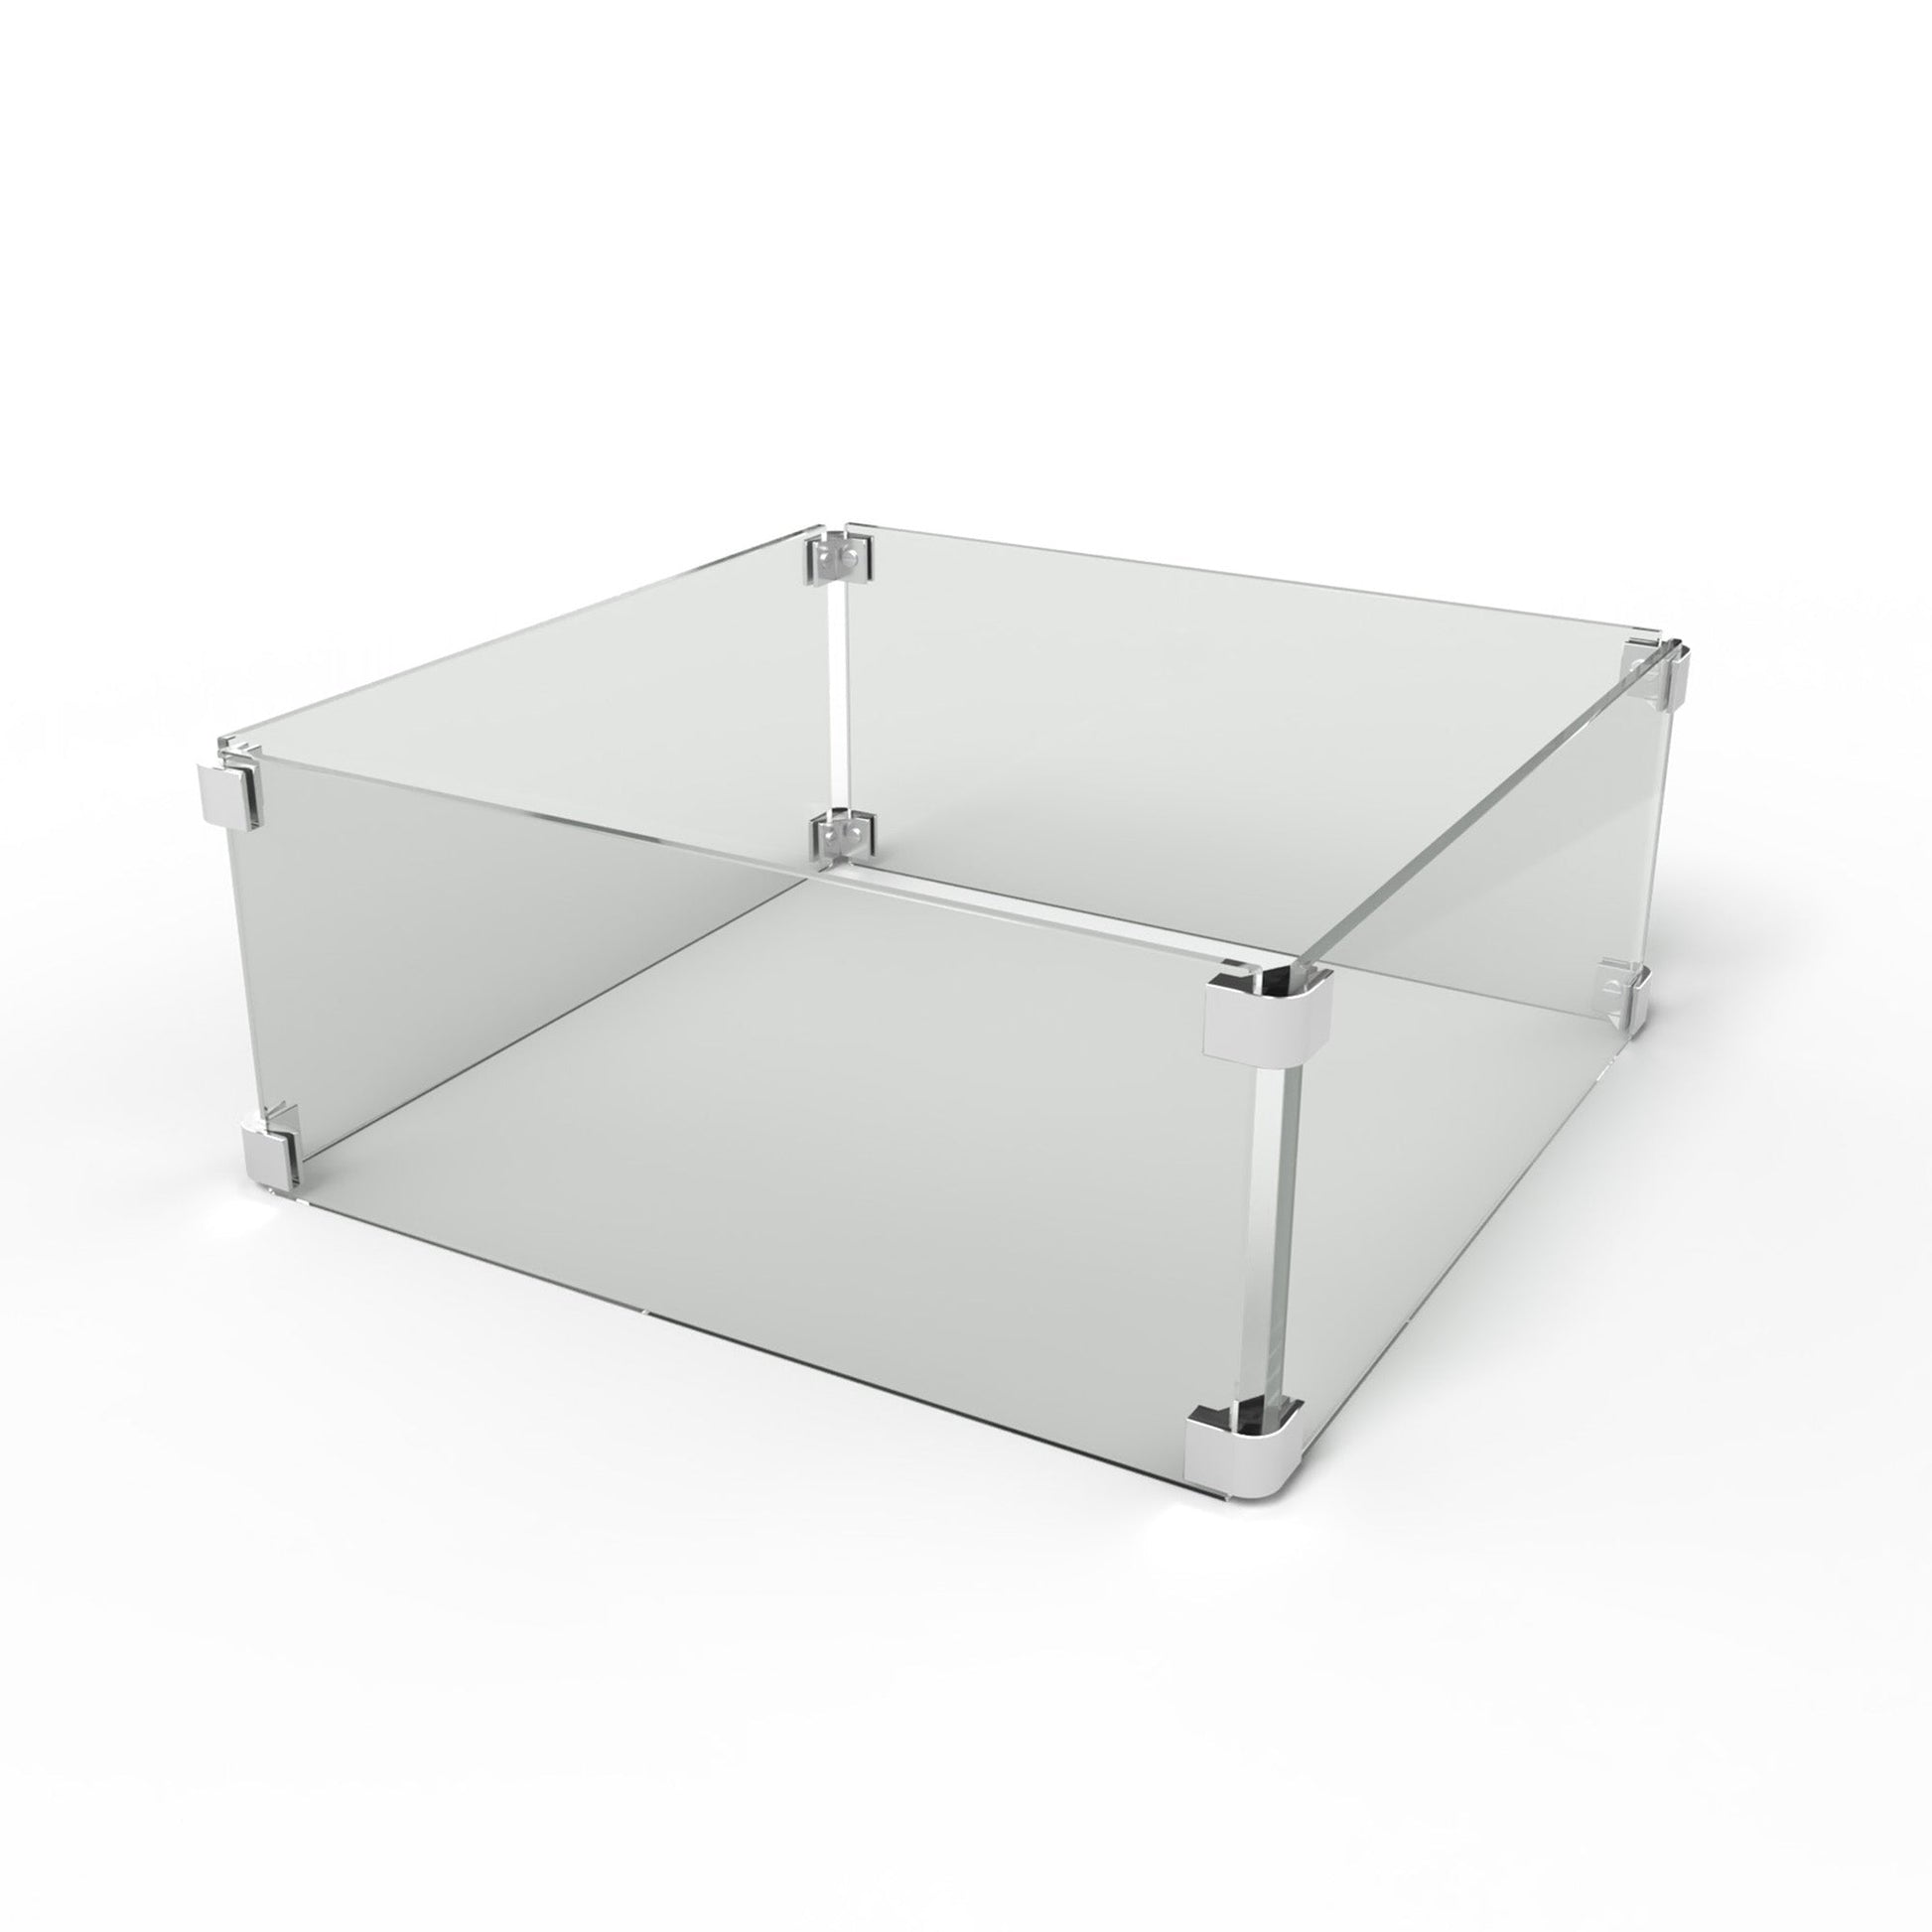 20" x 20" Square Glass Wind Guard ¼" - Tempered Glass with Polished Edges-Novel Home